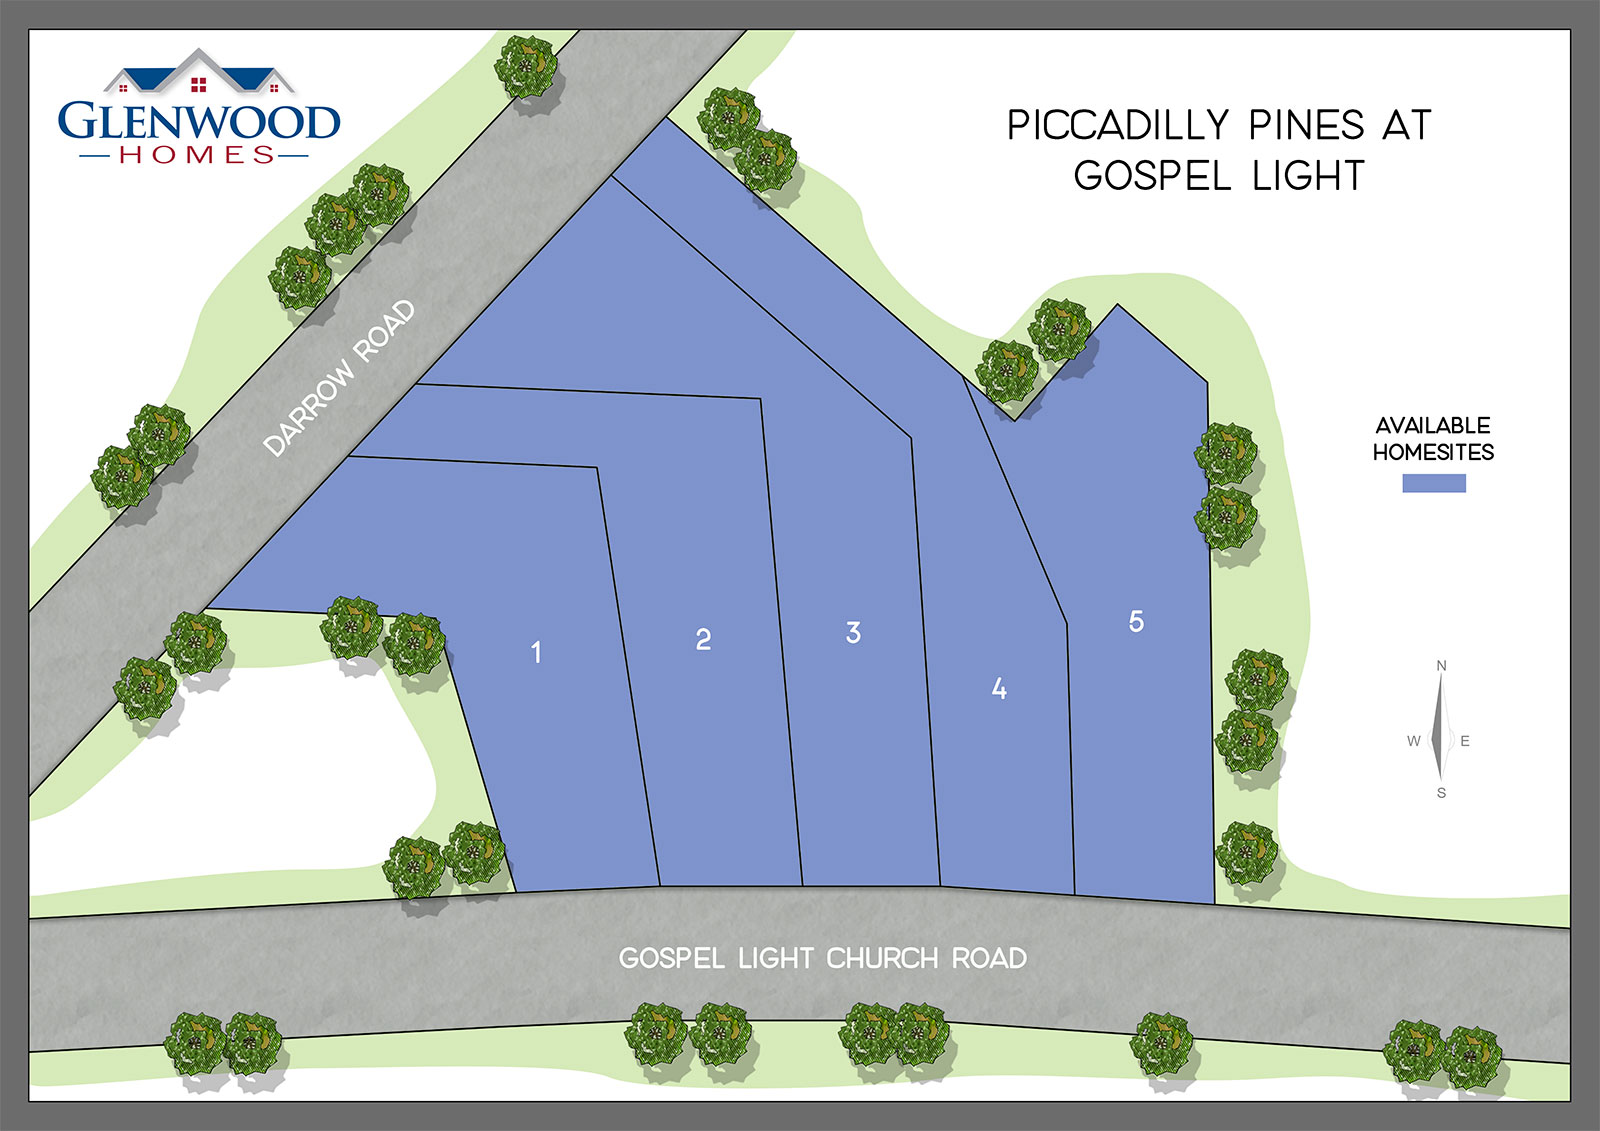 Piccadilly Pines at Gospel Light